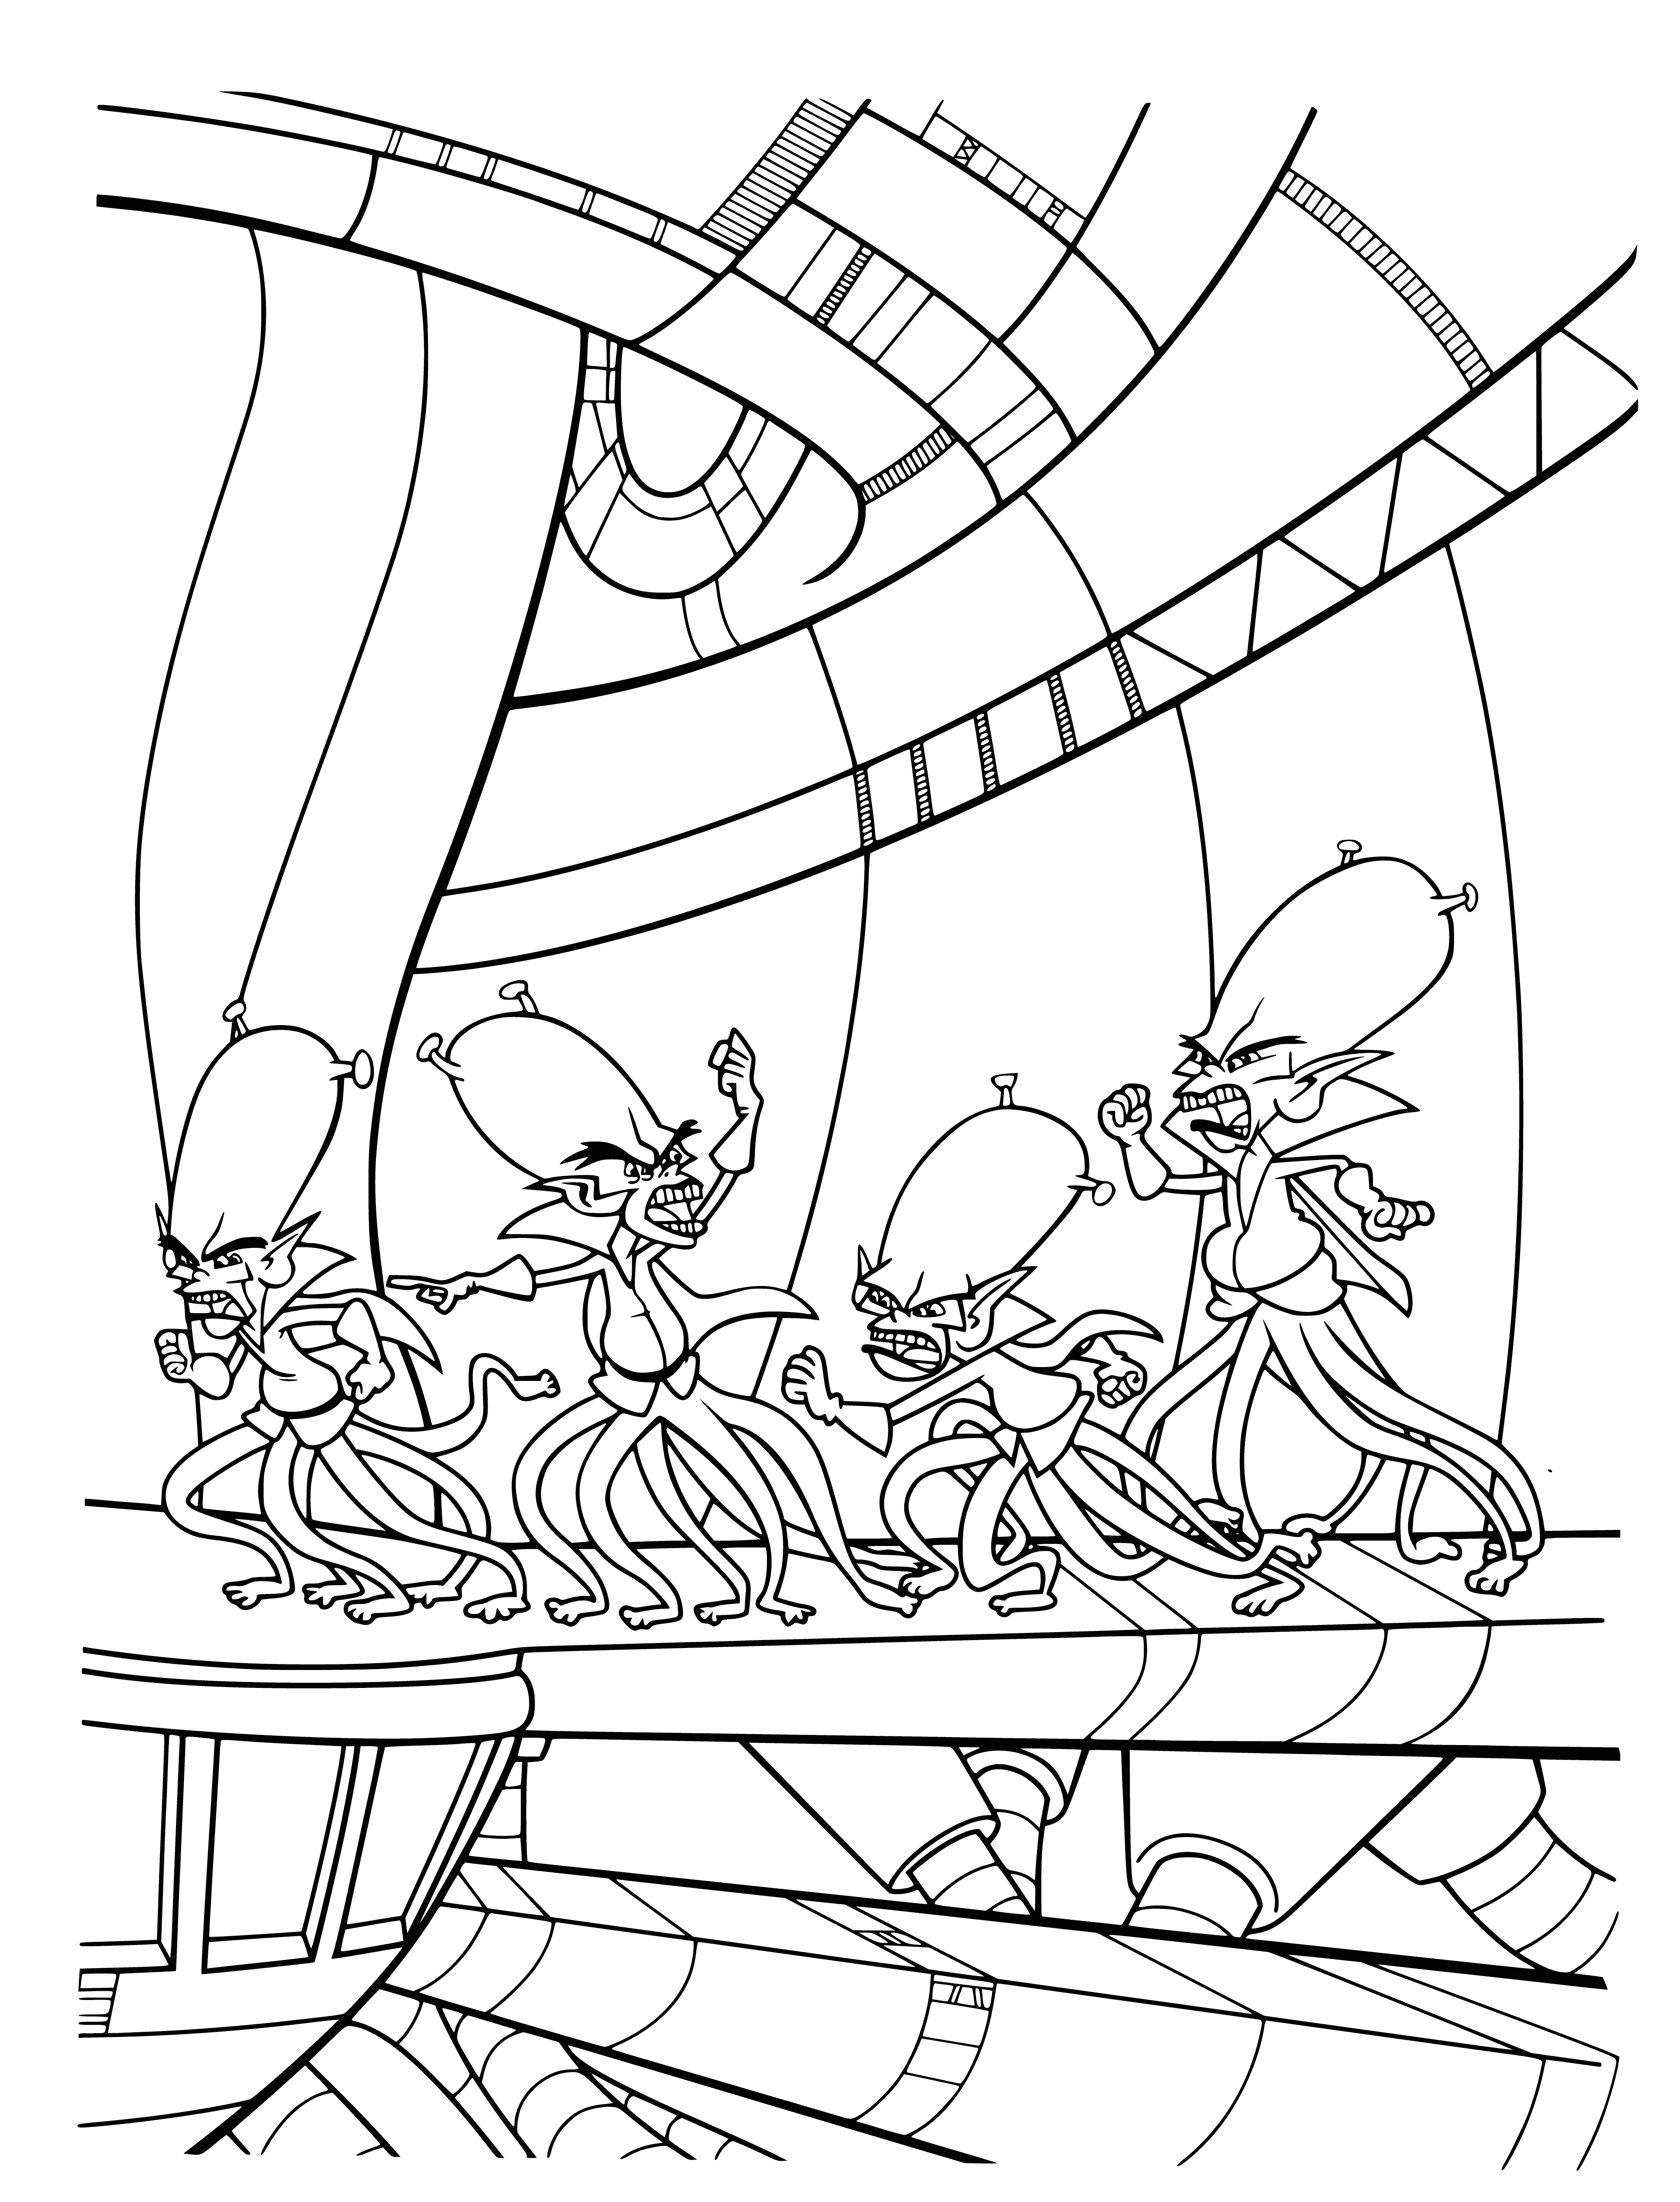 Clones of Galactosar coloring page